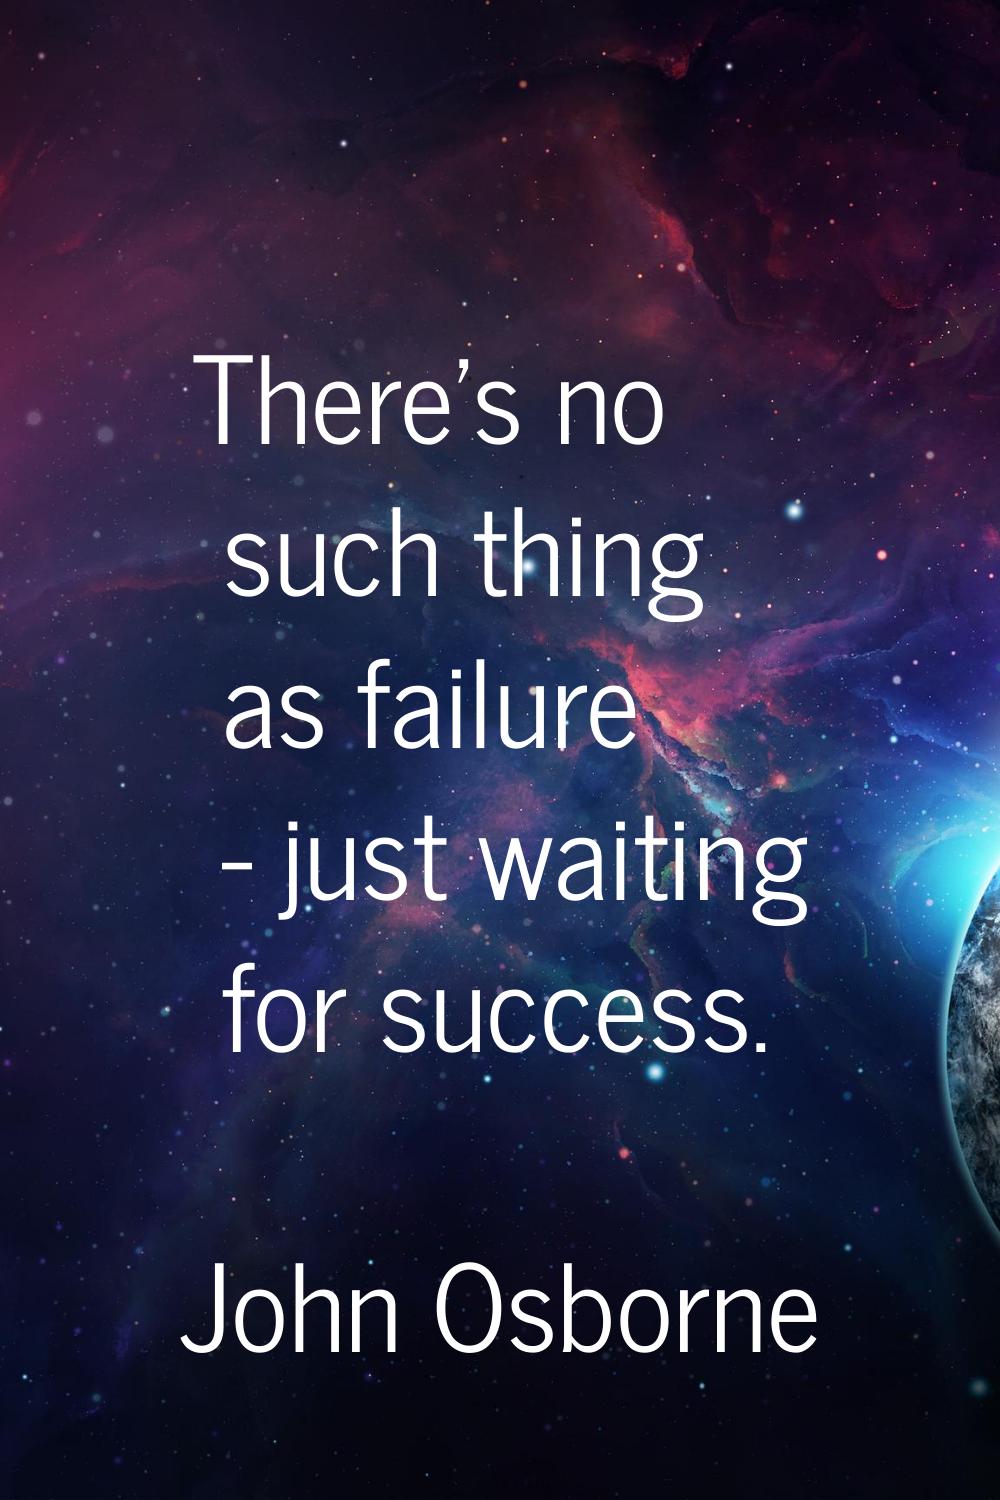 There's no such thing as failure - just waiting for success.